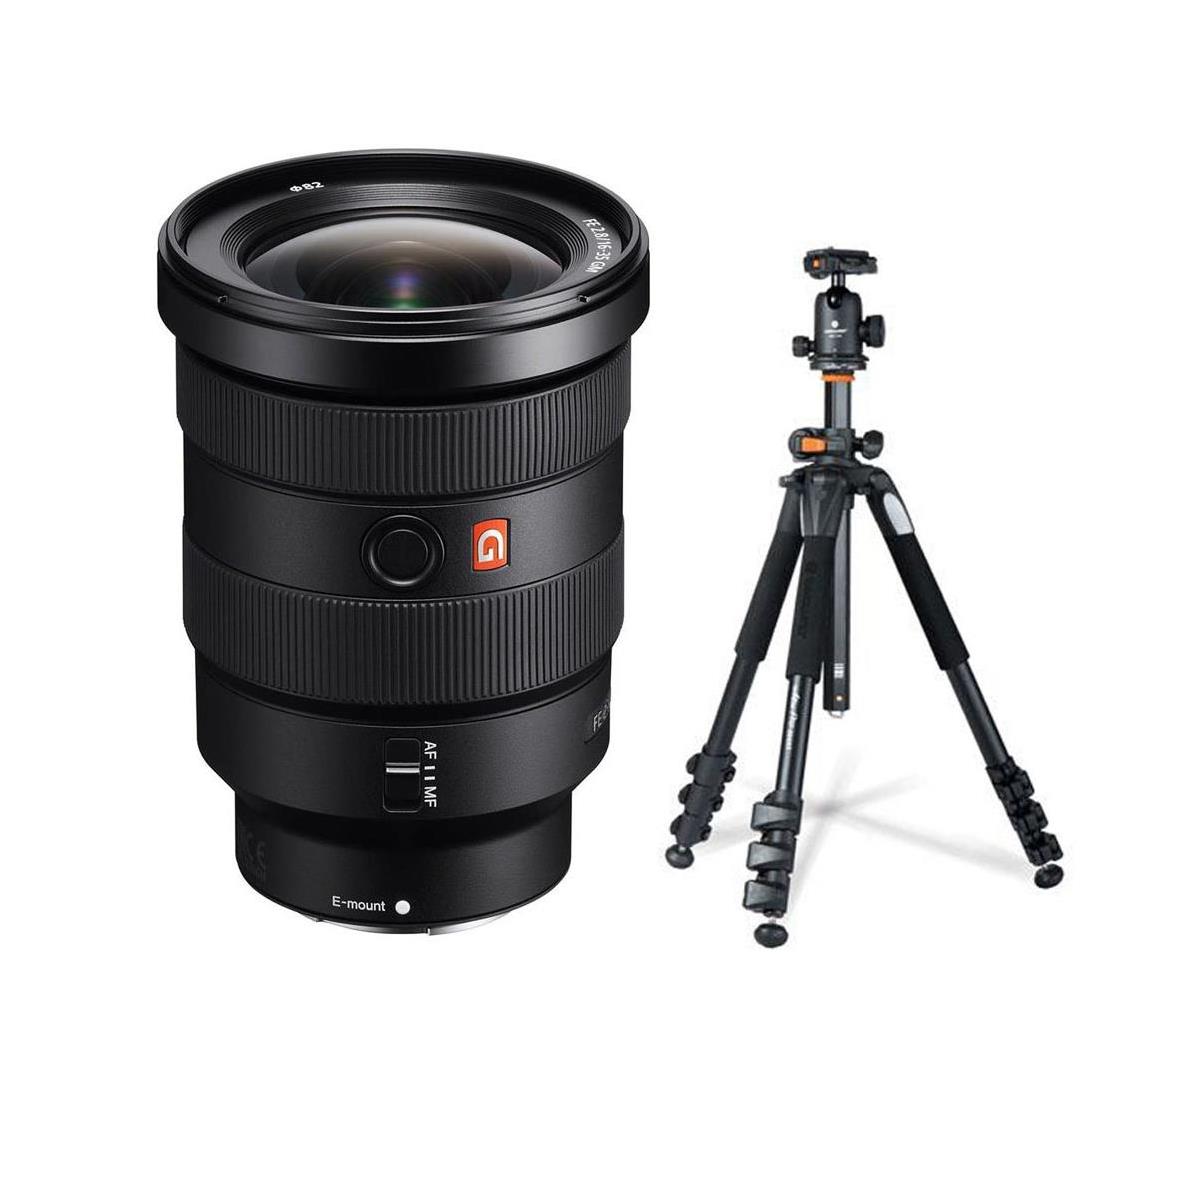 Image of Sony FE 16-35mm f/2.8 GM Lens for Sony E with Vanguard Alta Pro 264AT Tripod